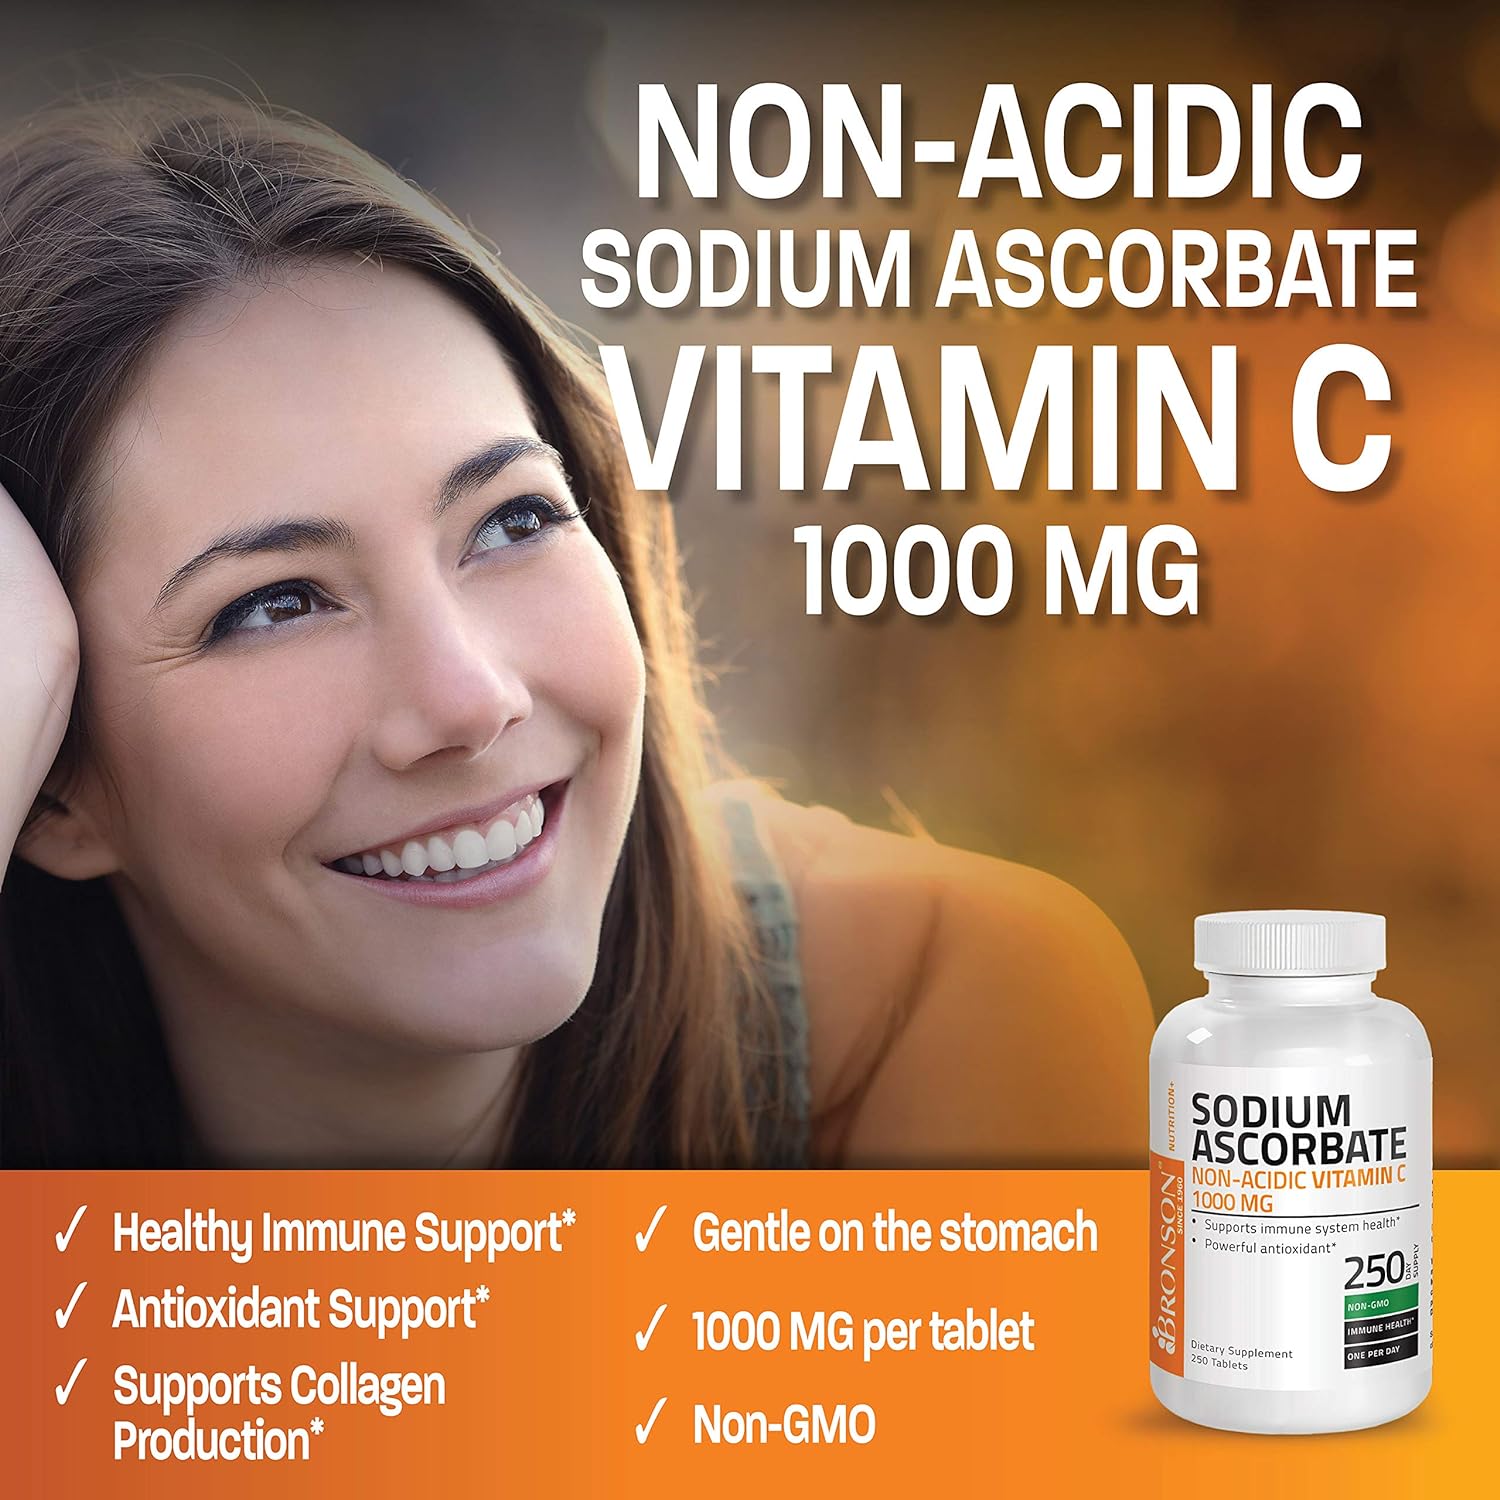 Sodium Ascorbate Non Acidic Vitamin C 1000 Mg Tablets - Gentle On The Stomach - Immune System Booster - Powerful Antioxidant - Non GMO Vitamin C Supplement, 250 Count : Sodium Ascorbate Tablets : Health & Household